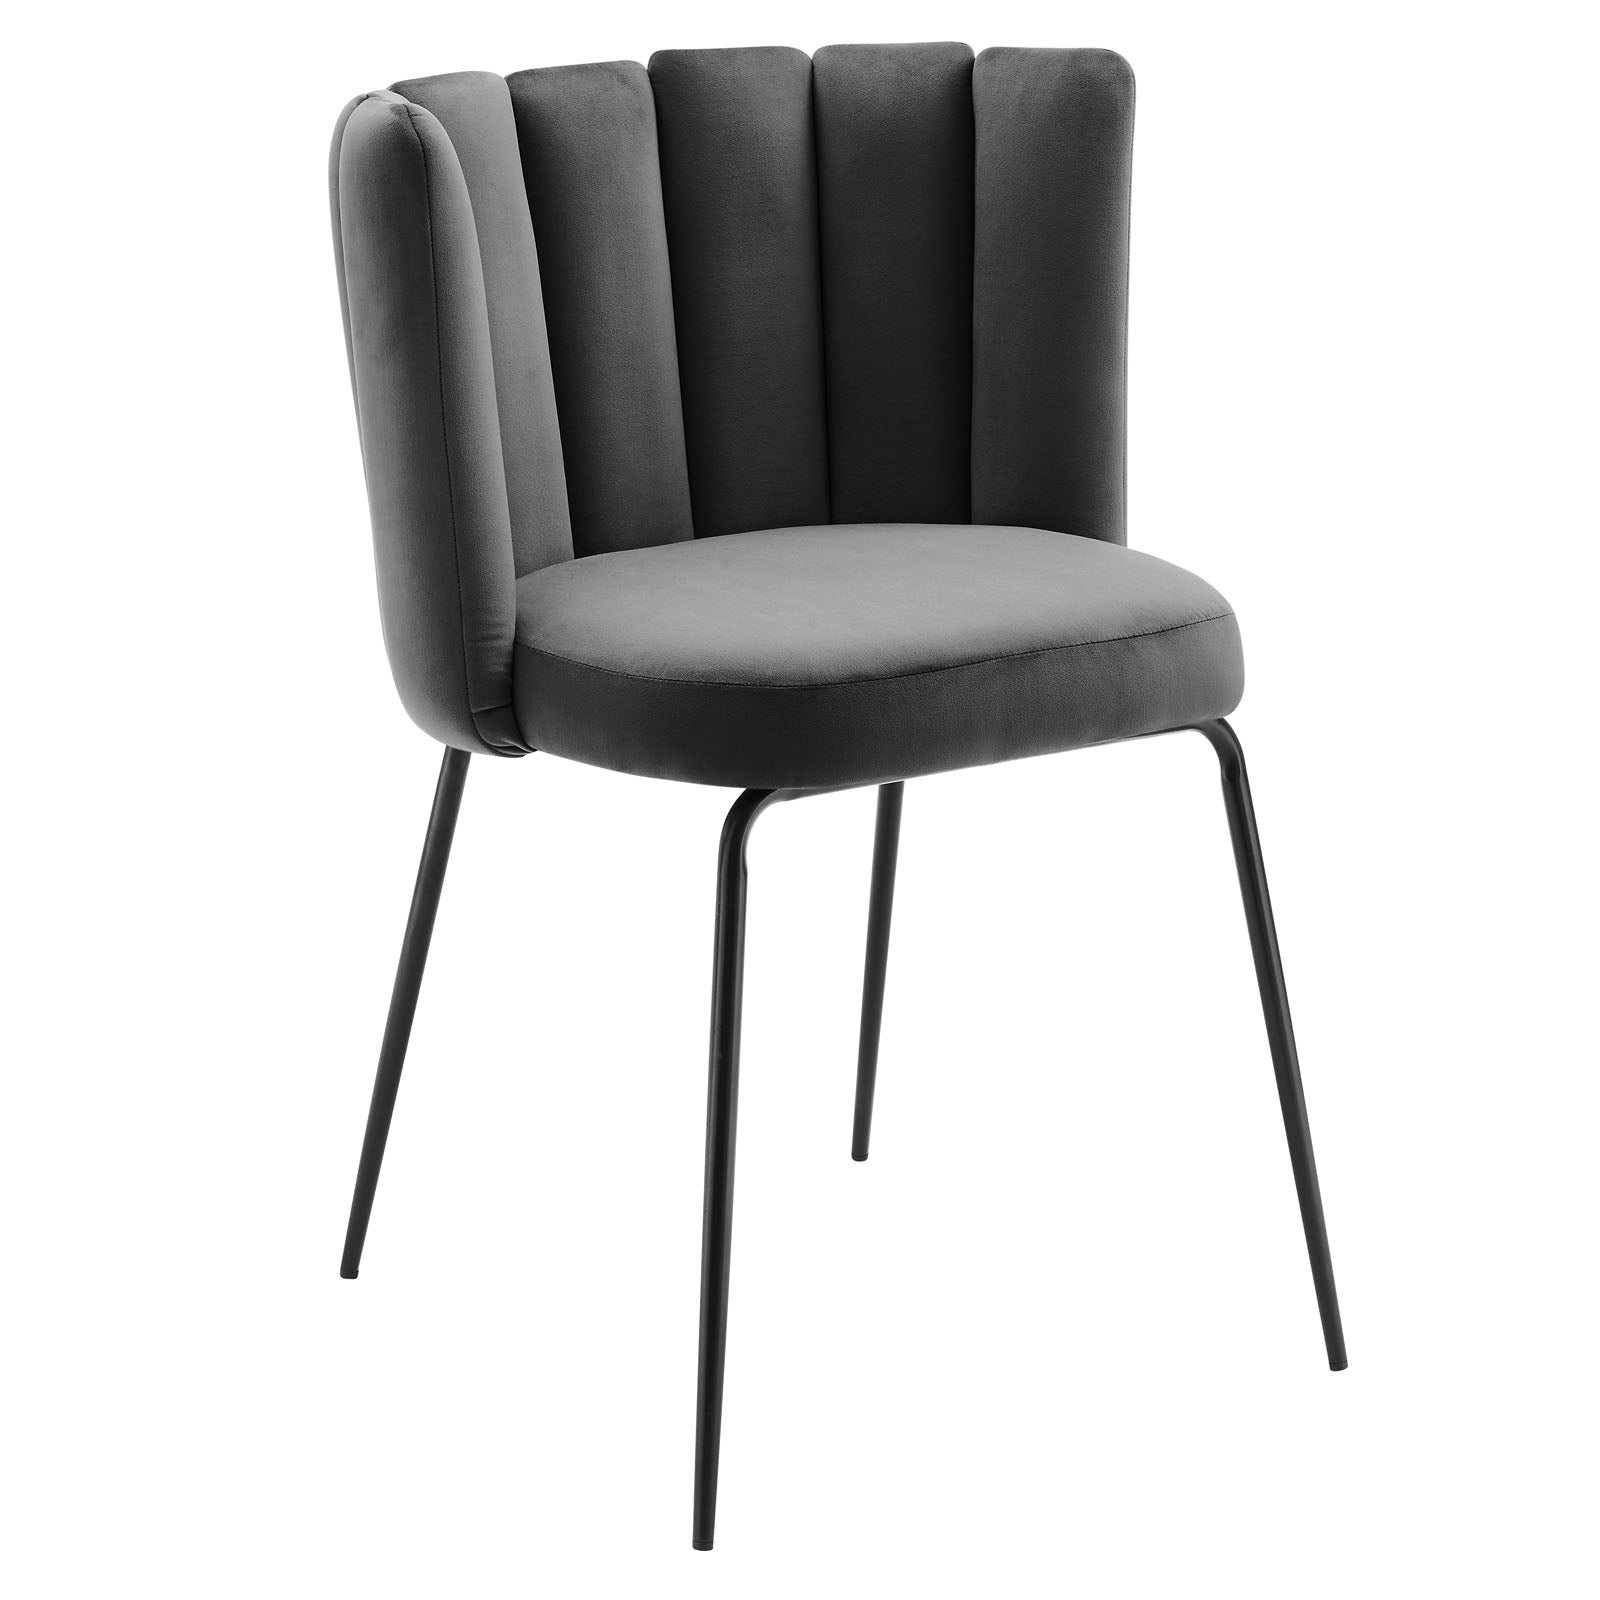 Modway Dining Chairs - Virtue Performance Velvet Dining Chair Set of 2 Black Gray